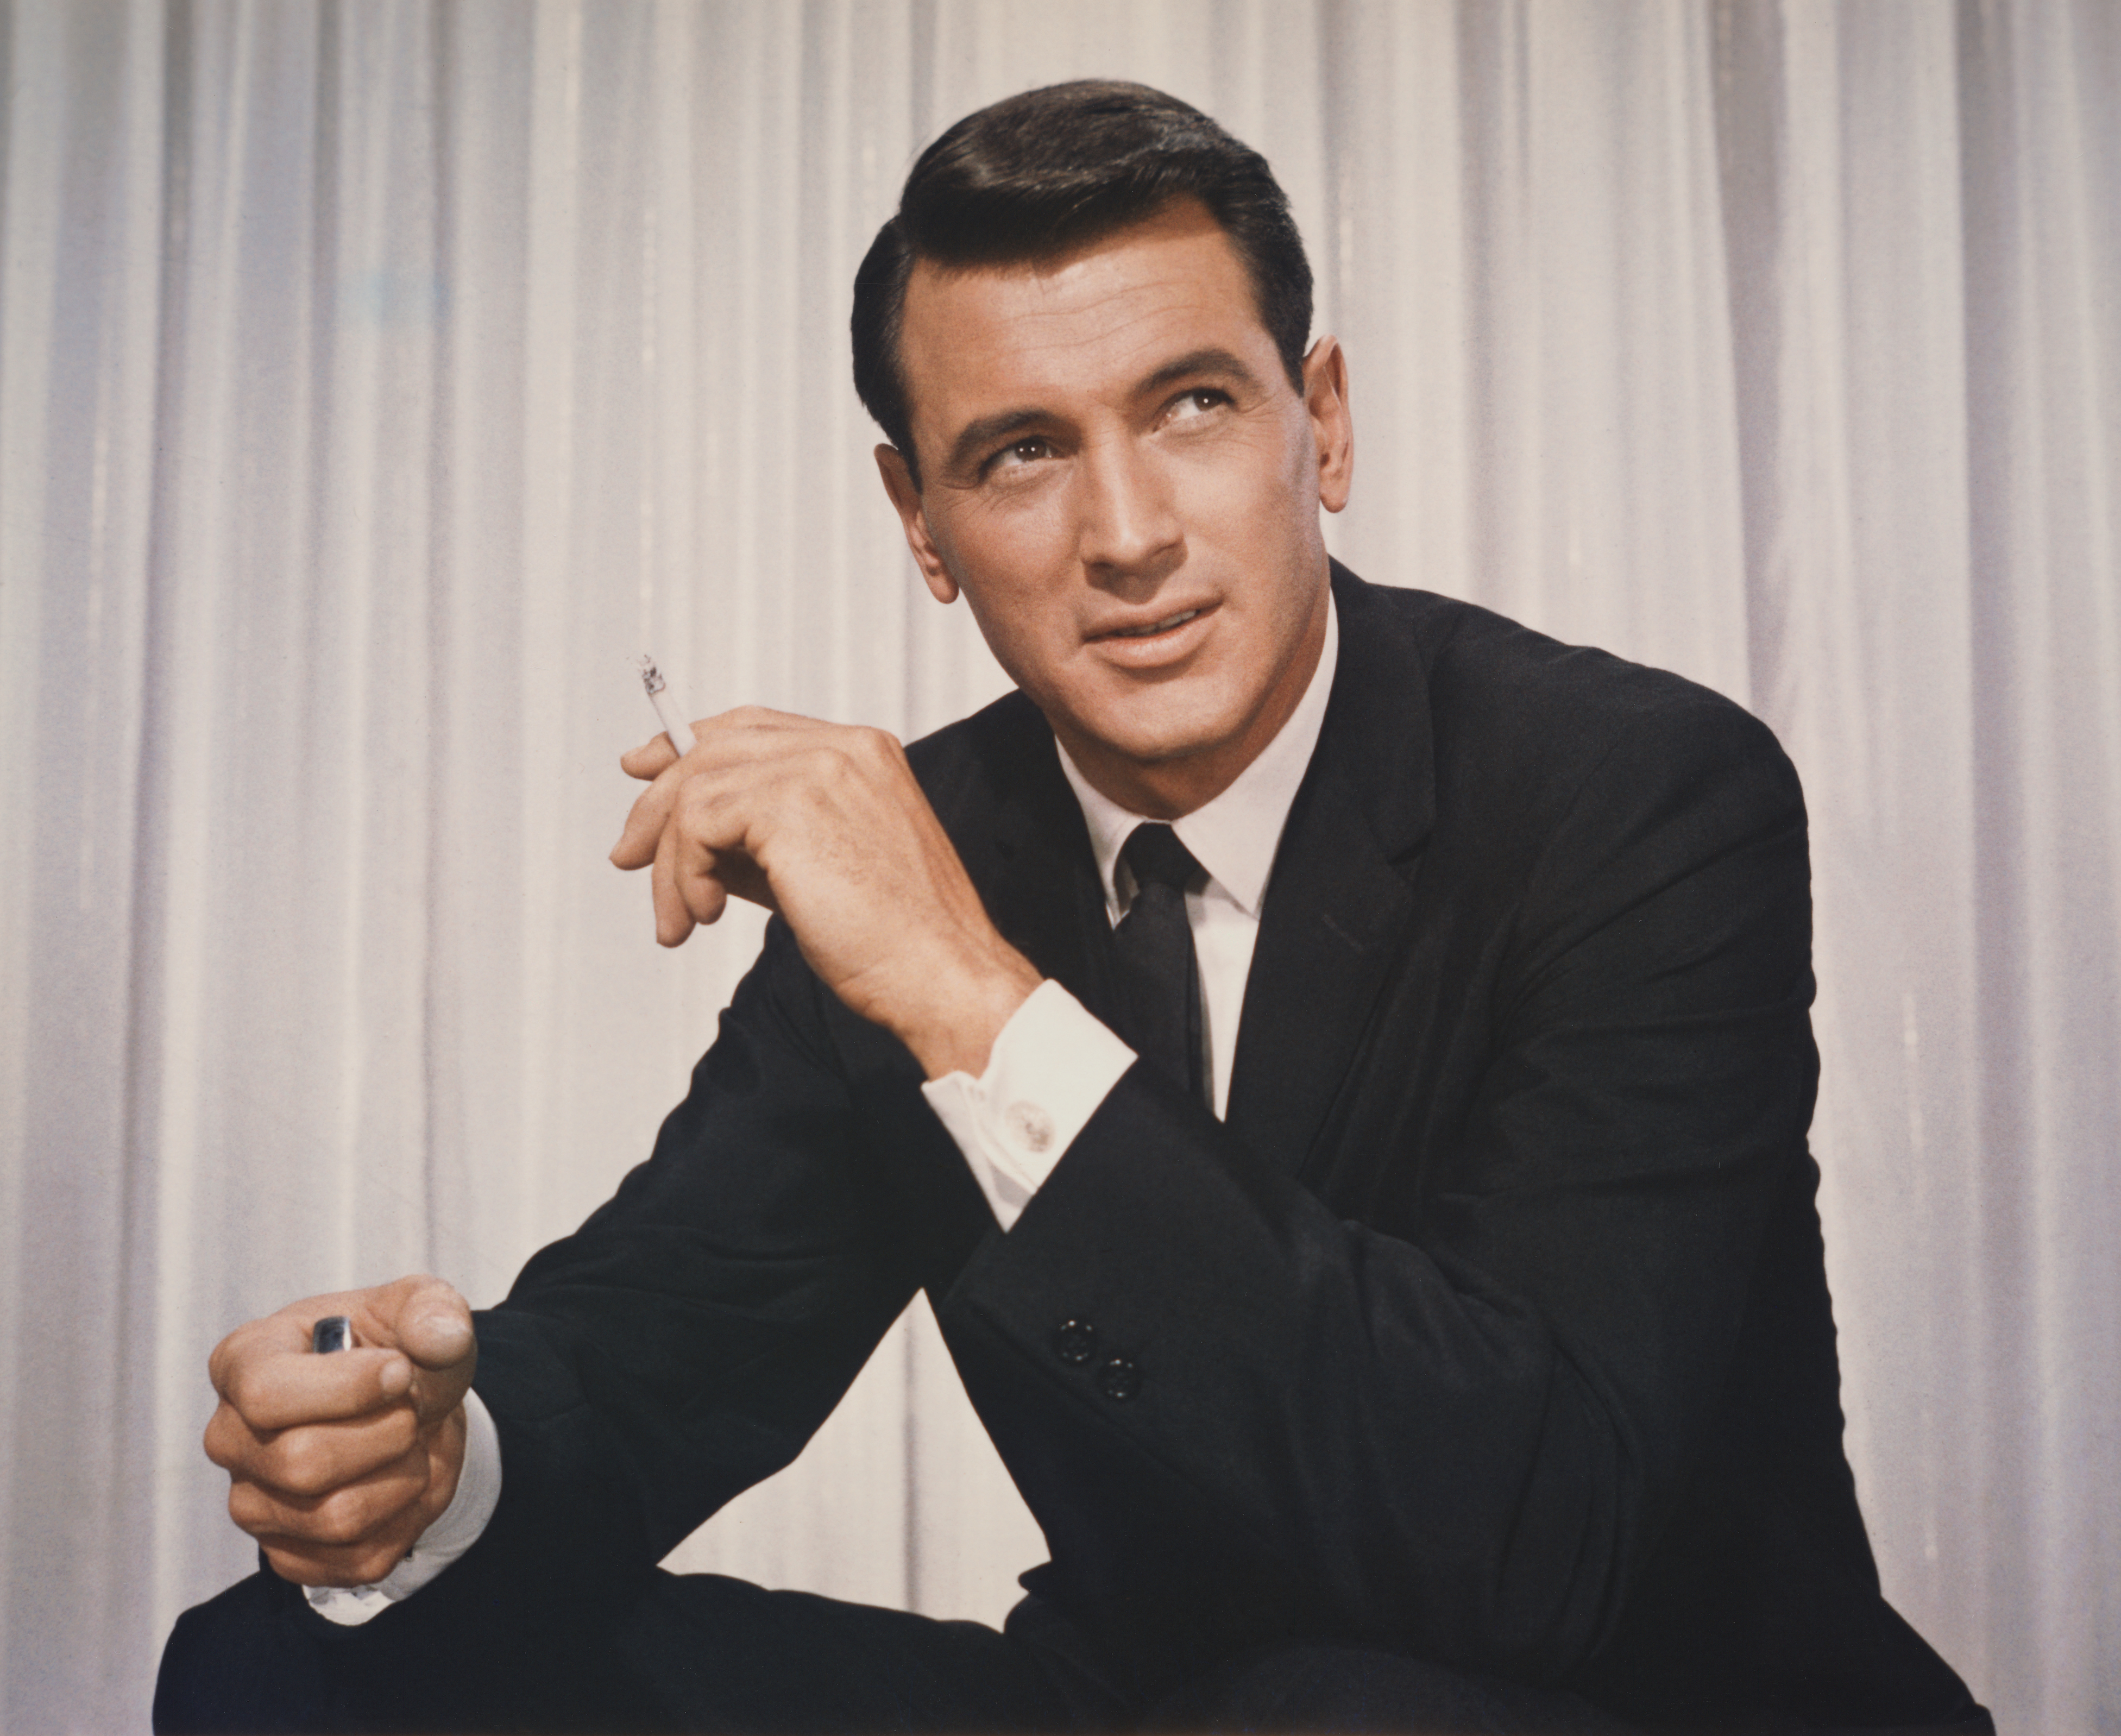 Rock Hudson circa the 1950s. | Source: Getty Images